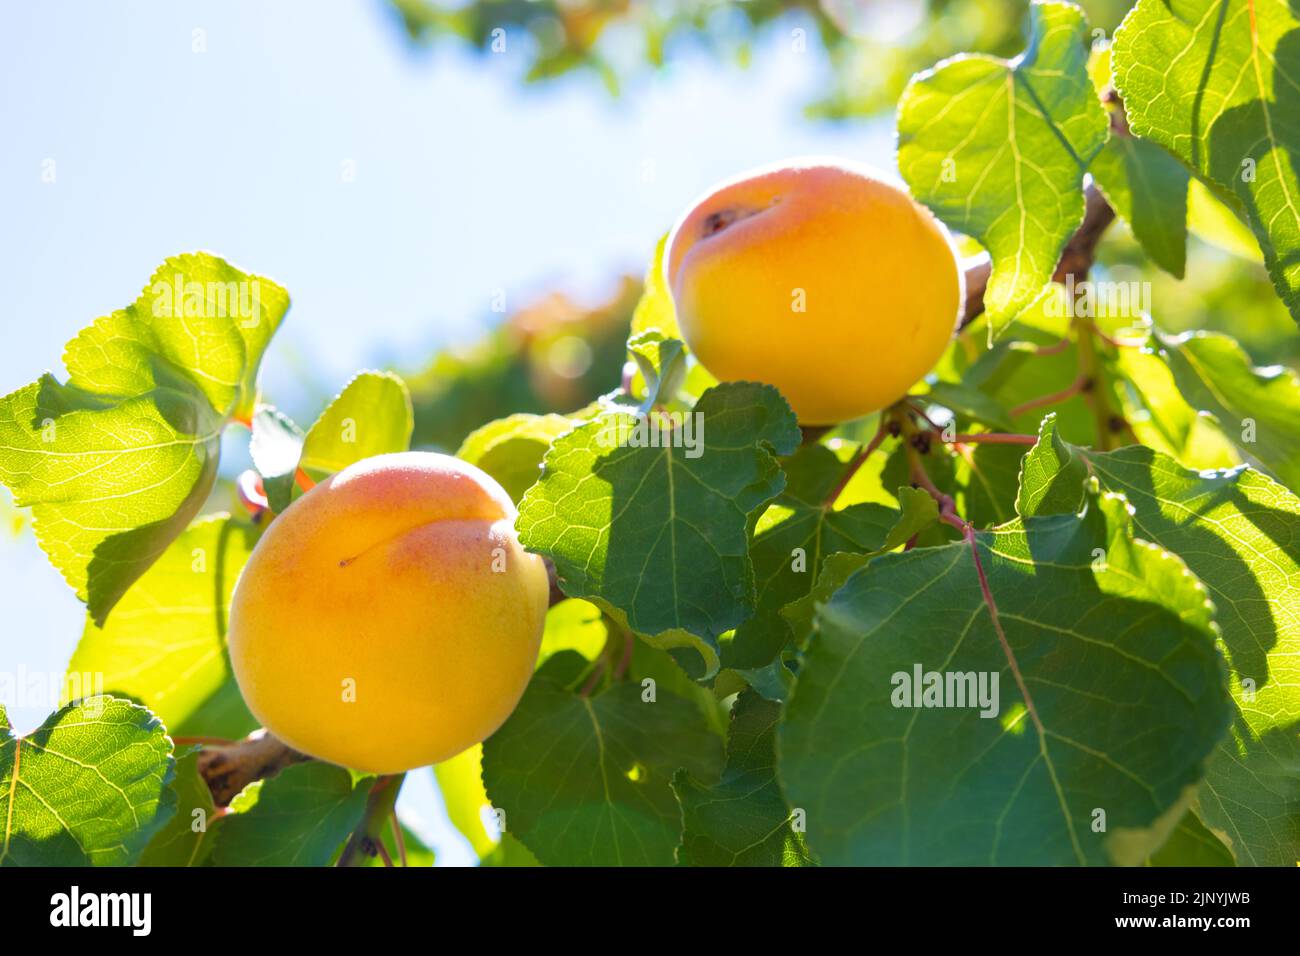 Organic apricot production. Apricots on the tree in focus. Vegan foods concept. Stock Photo